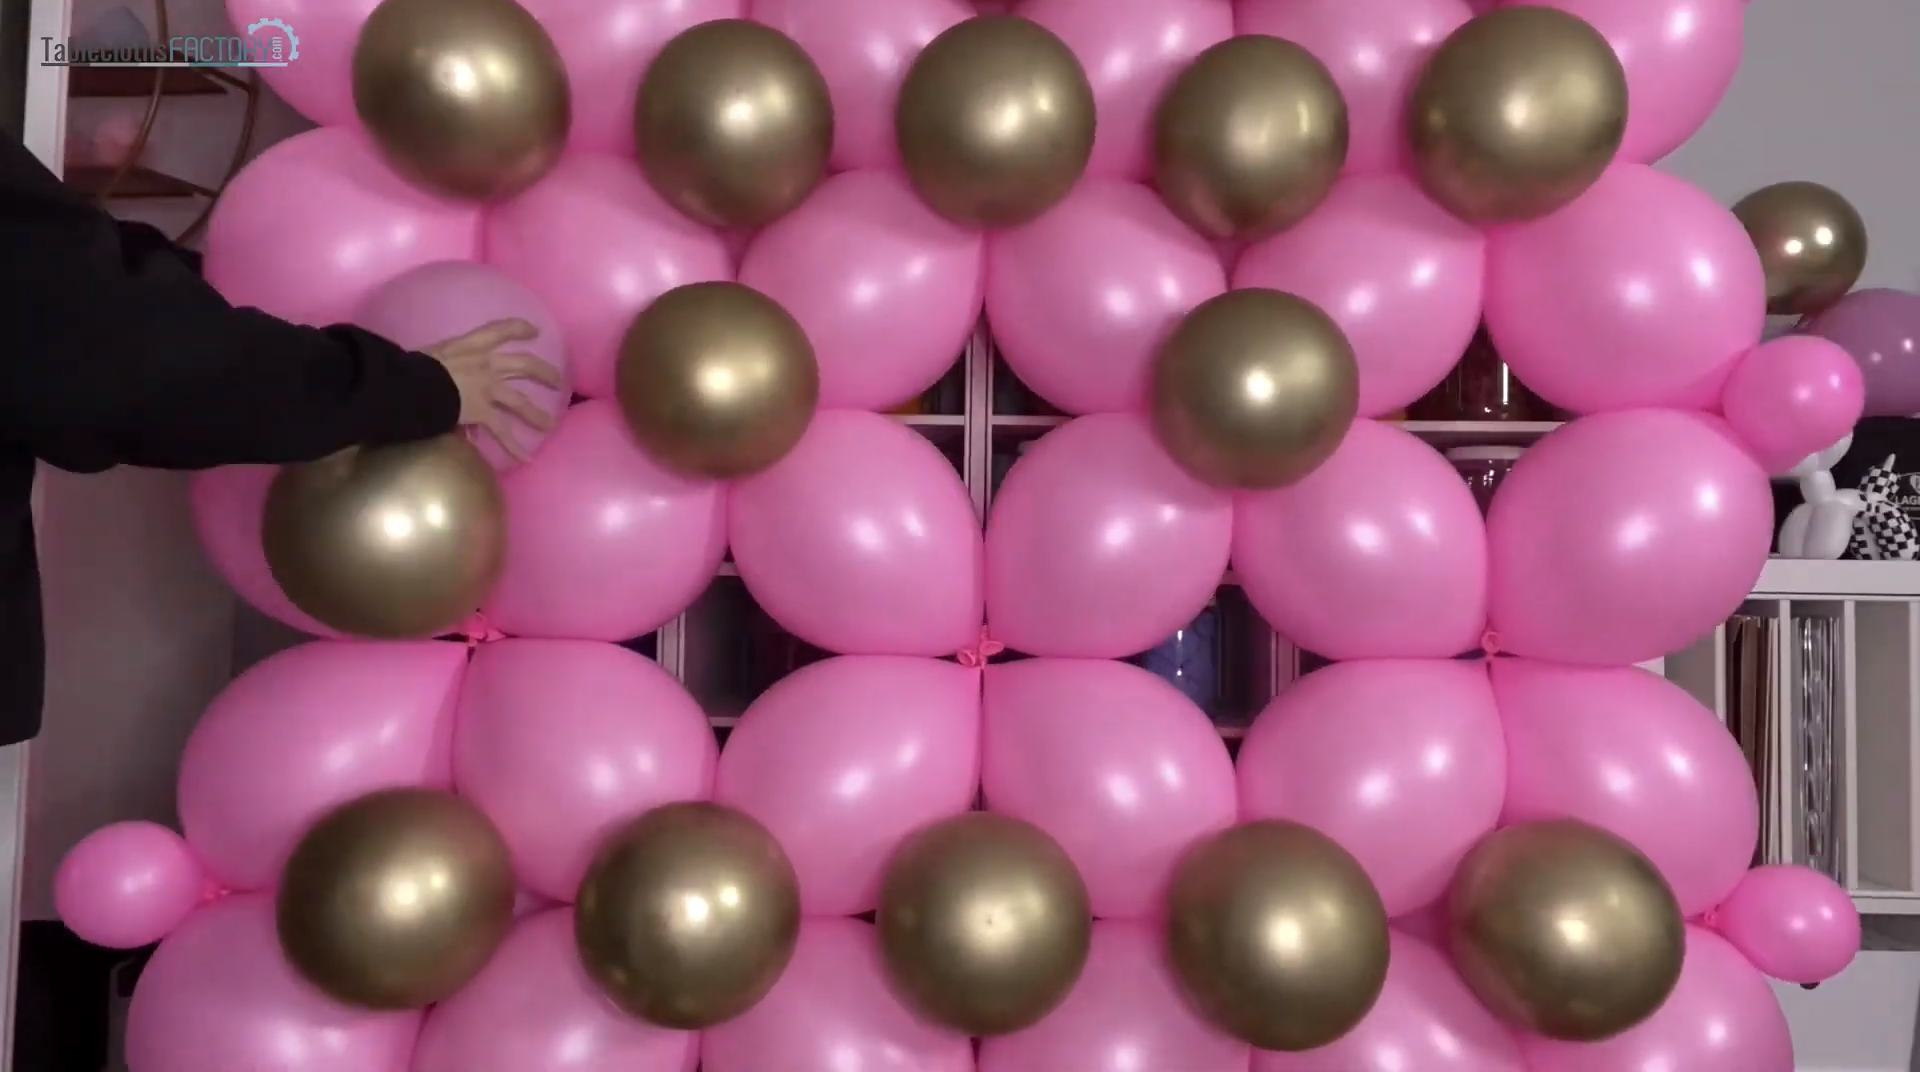 Assembling the pink and gold balloon wall decor